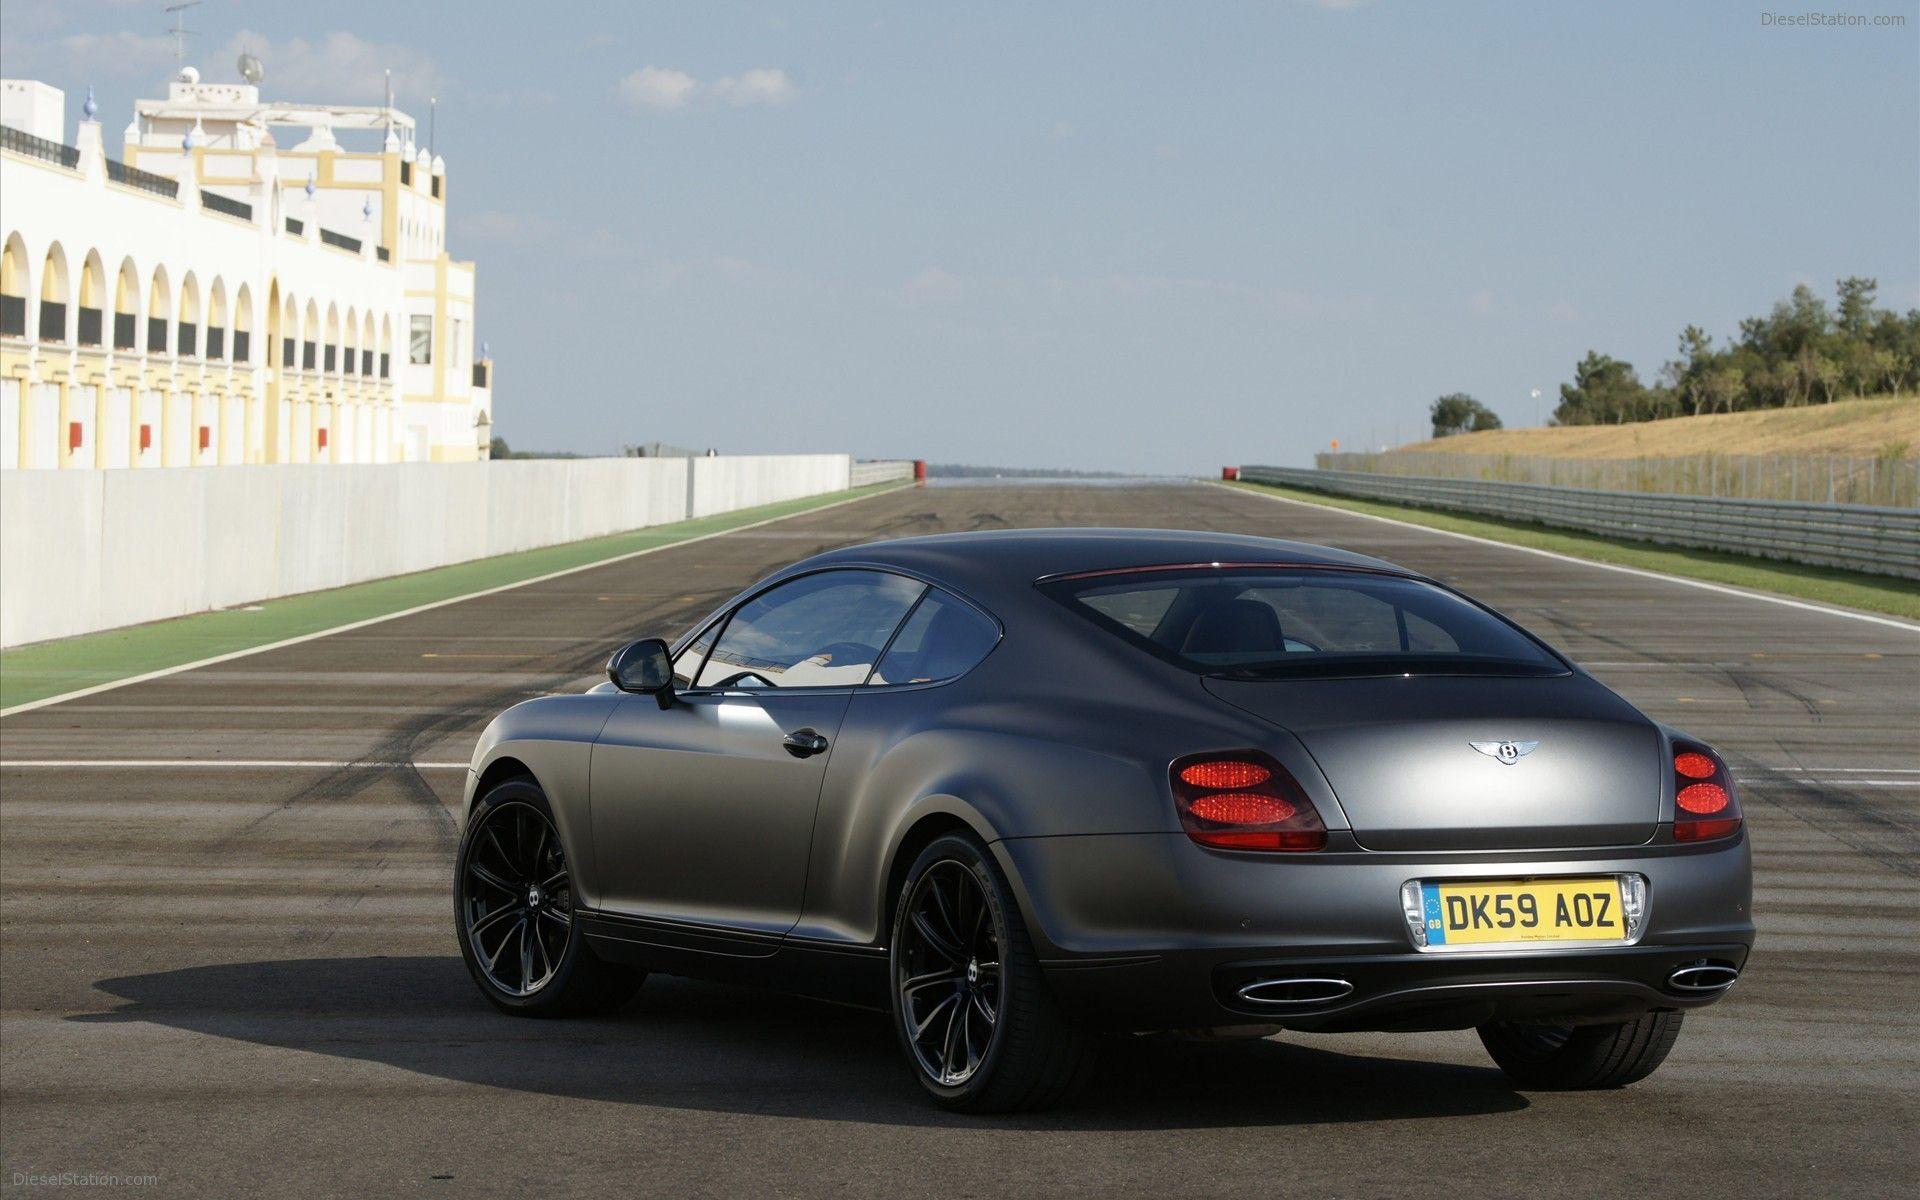 More Pics, 2010 Bentley Continental Supersports Widescreen Exotic